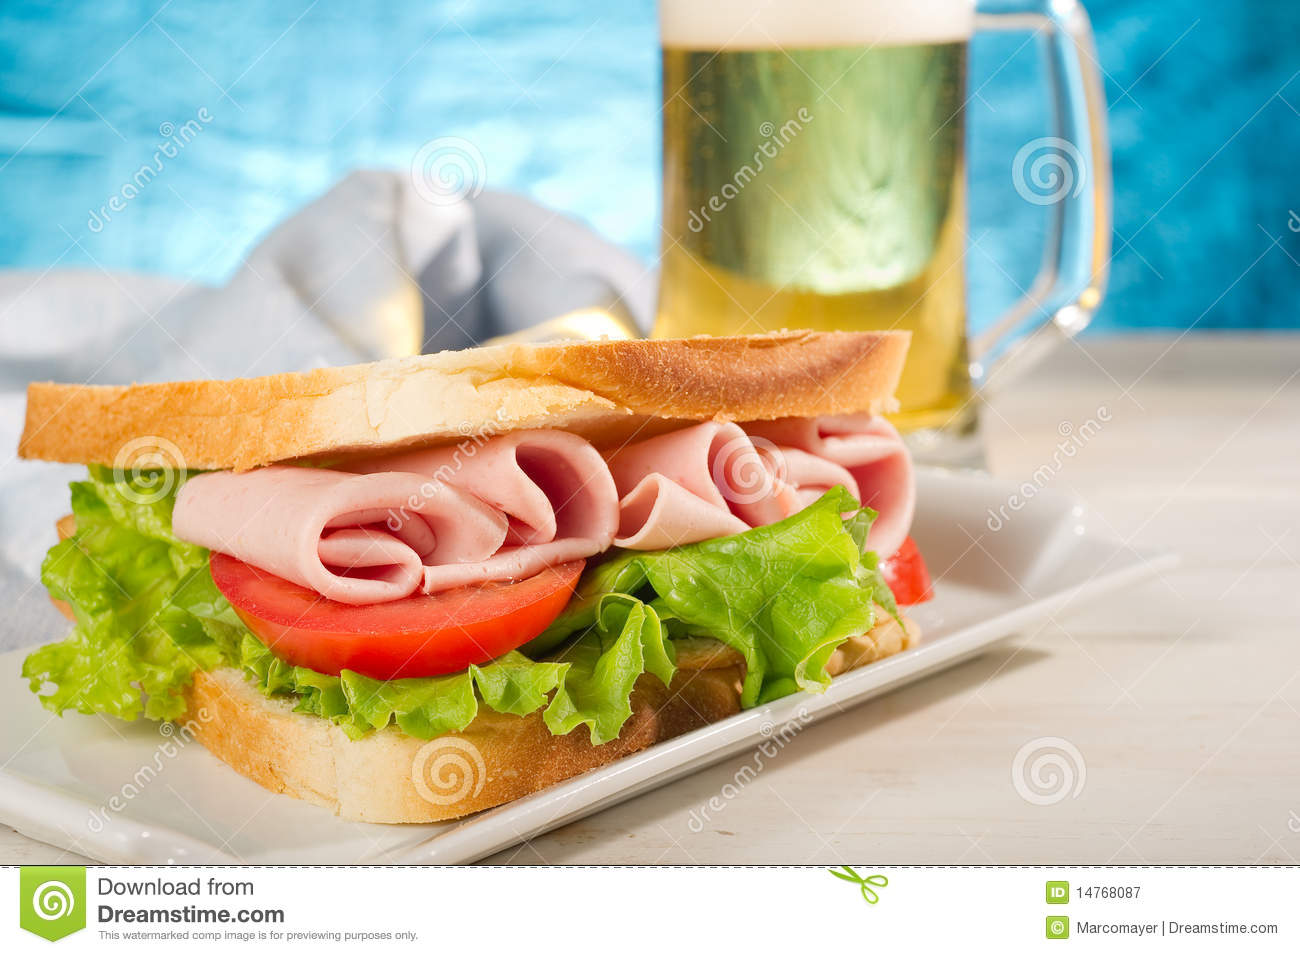 Turkey Sandwich With Lettuce Slice Tomato And Glass Of Beer